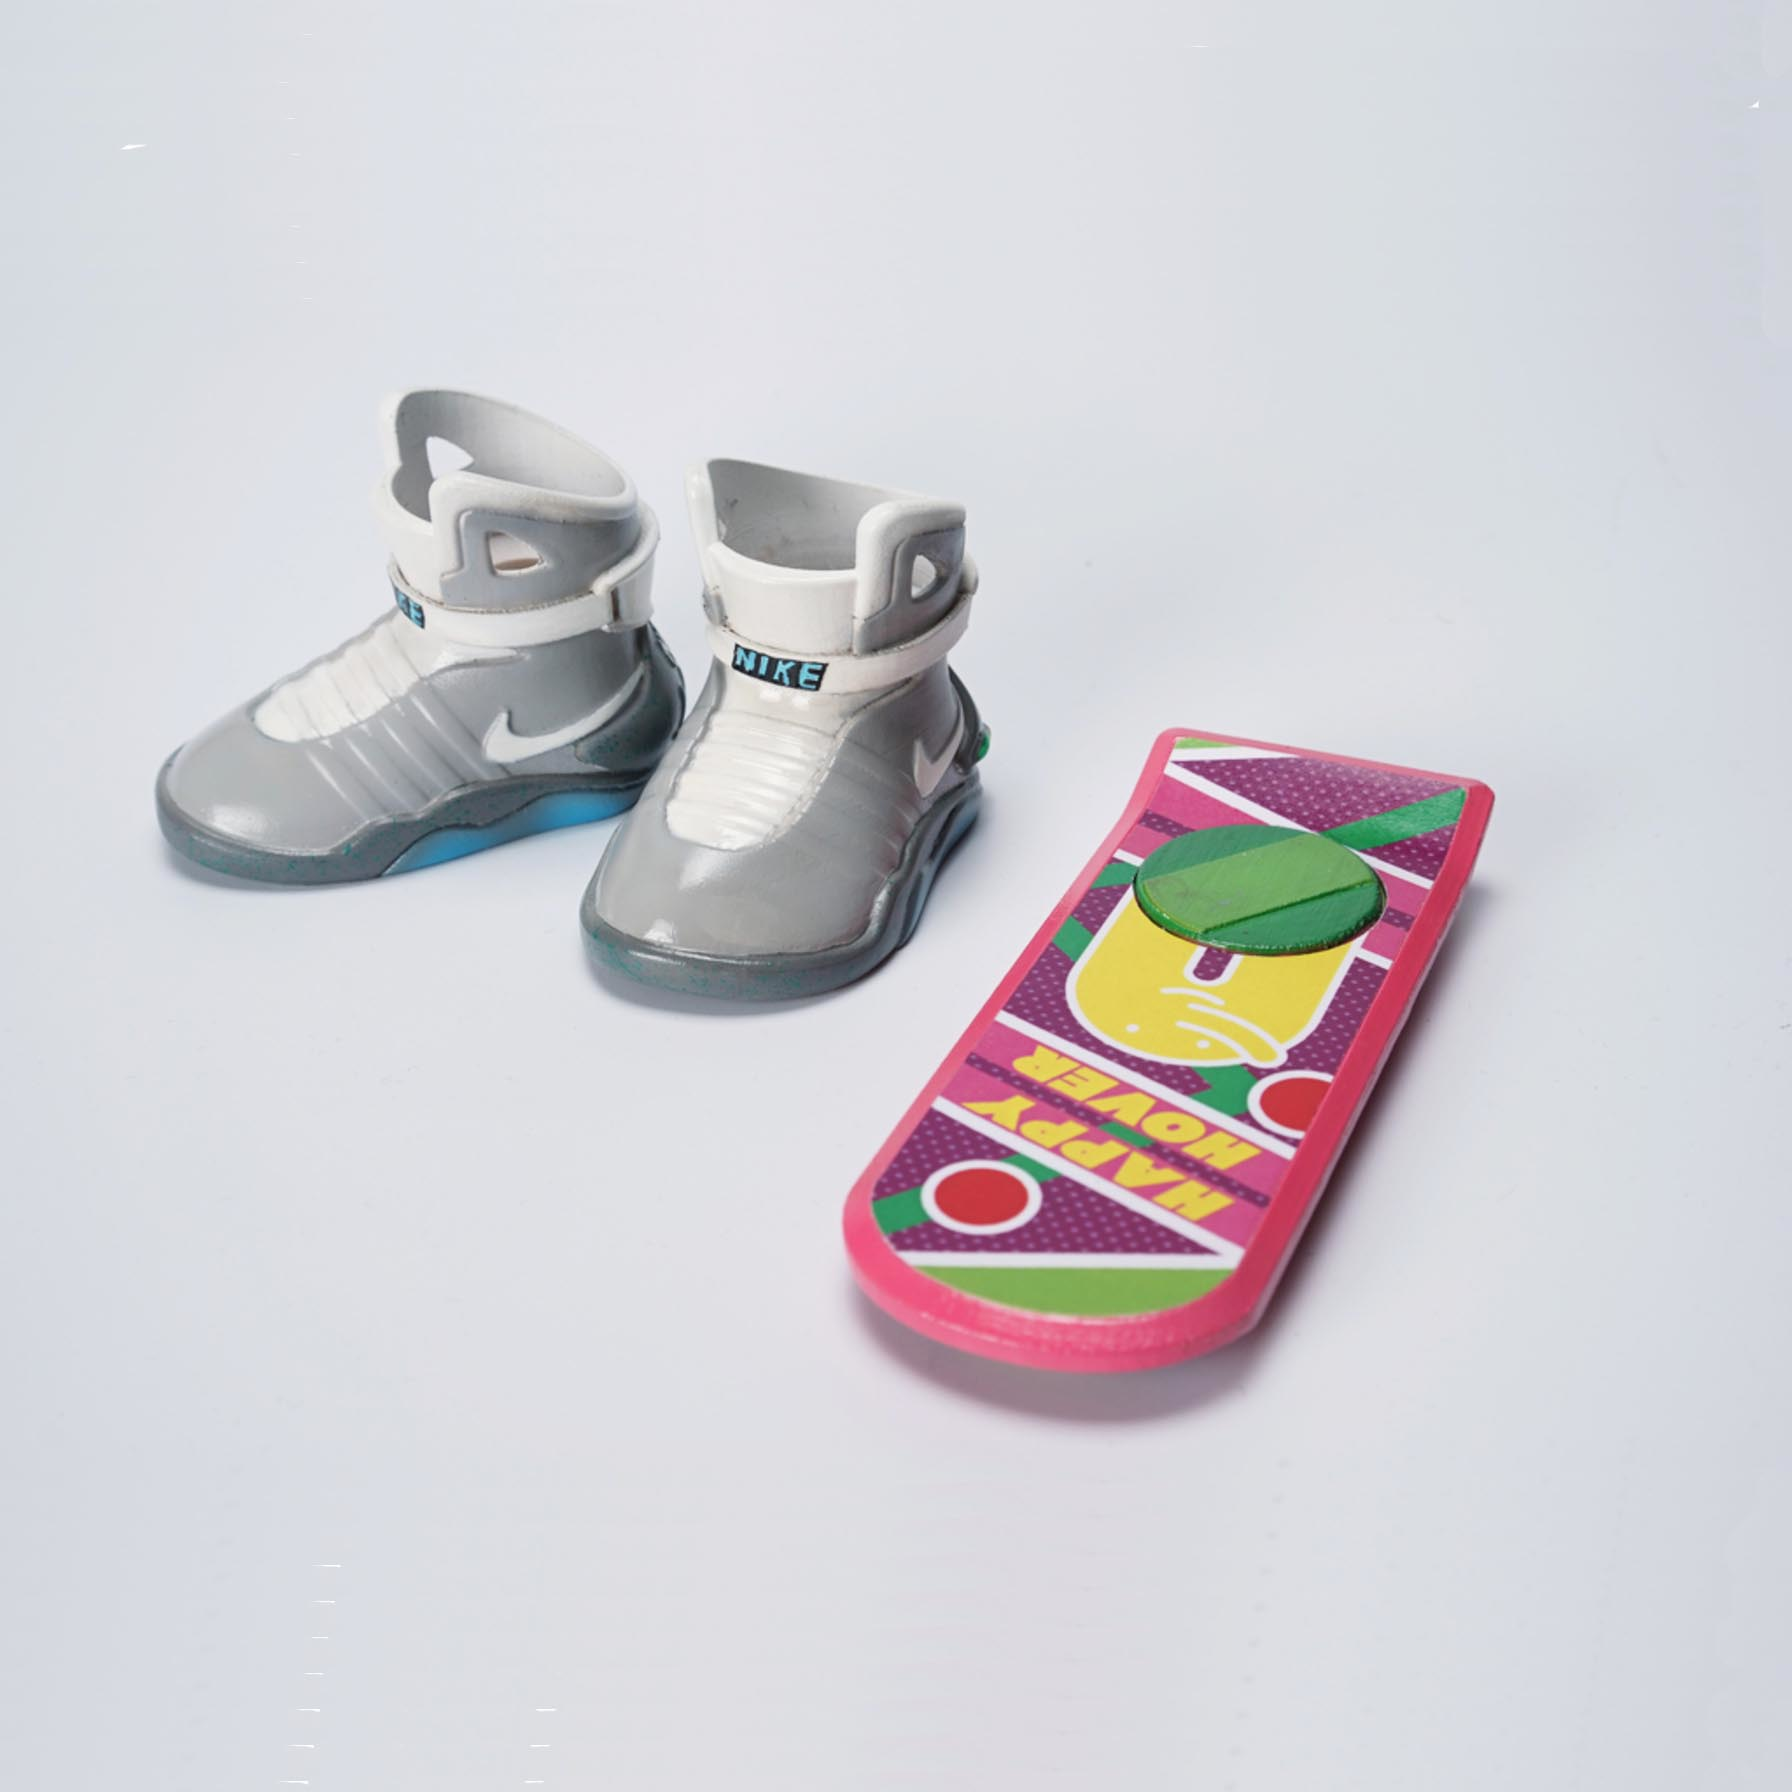 Back-To-Future.png Download free STL file Back to the future Nike Sneakers & HOVER BOARD made by ATOM 3D printer • 3D print object, ATOM3dp